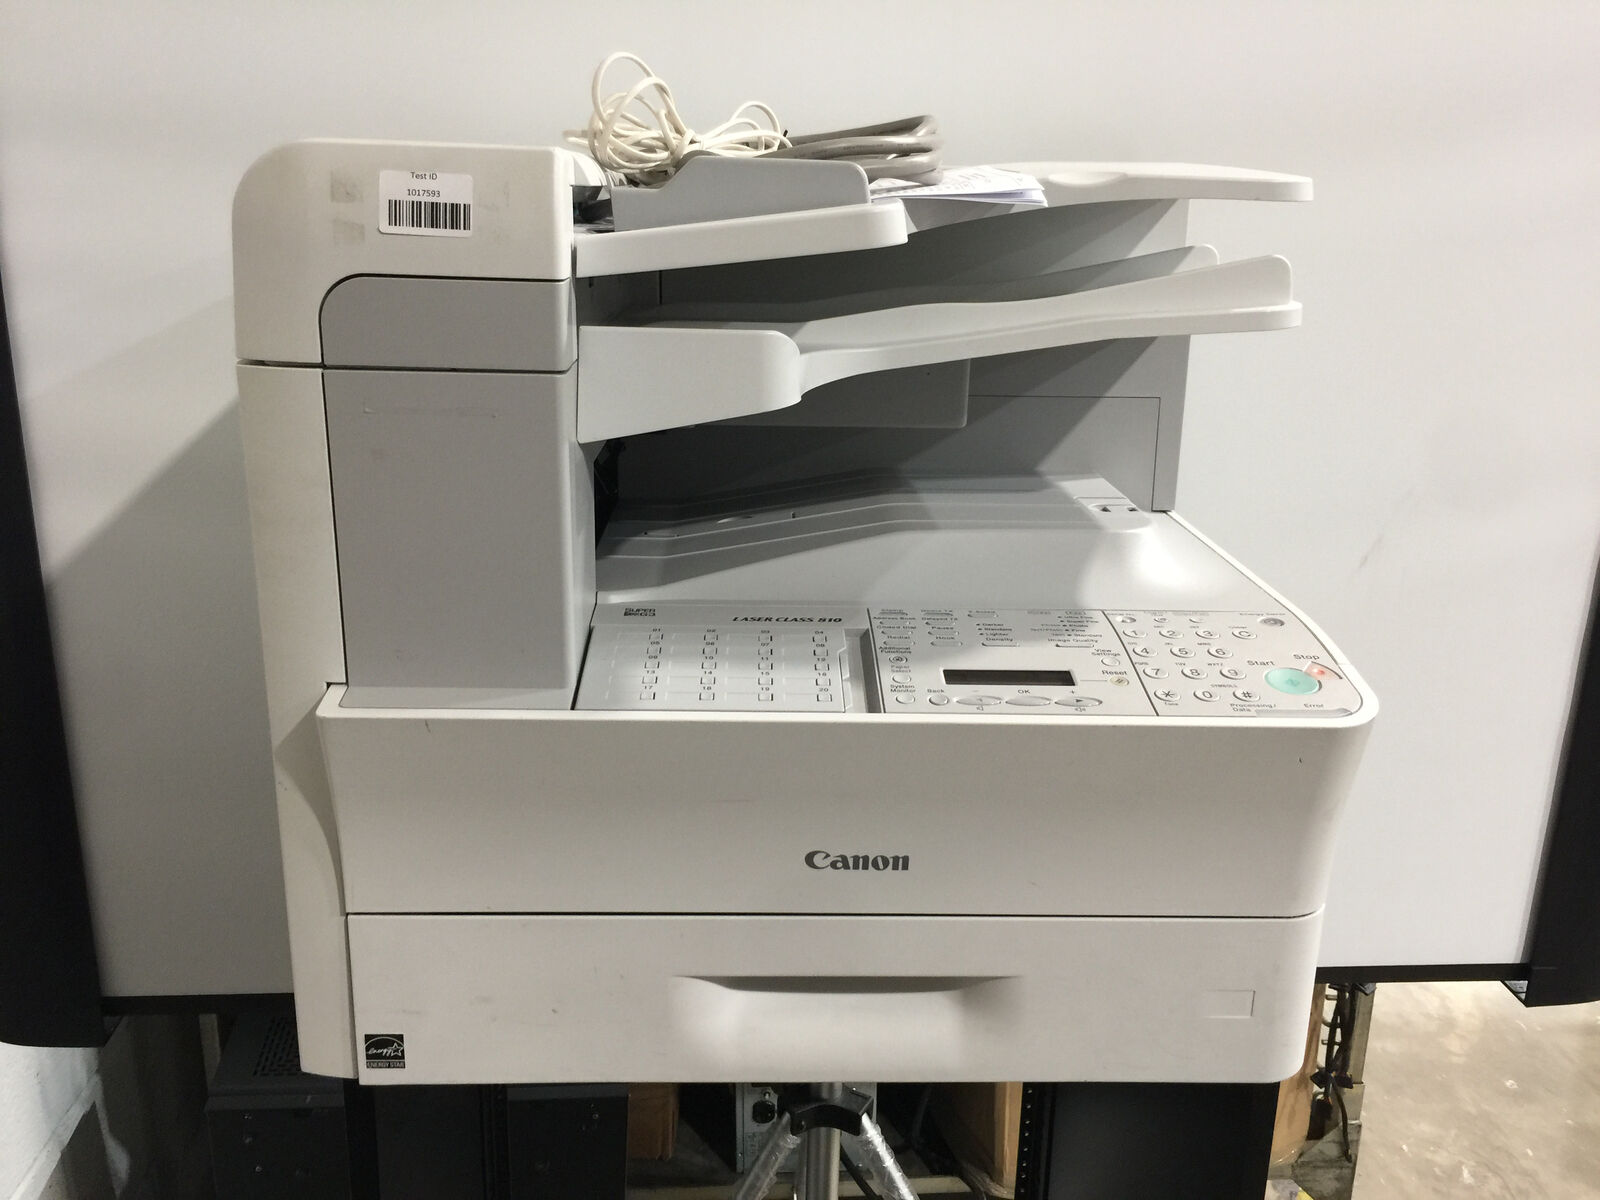 Canon Laser Class LC 810 Super G3 Fax Machine Printer, --TESTED AND RESET